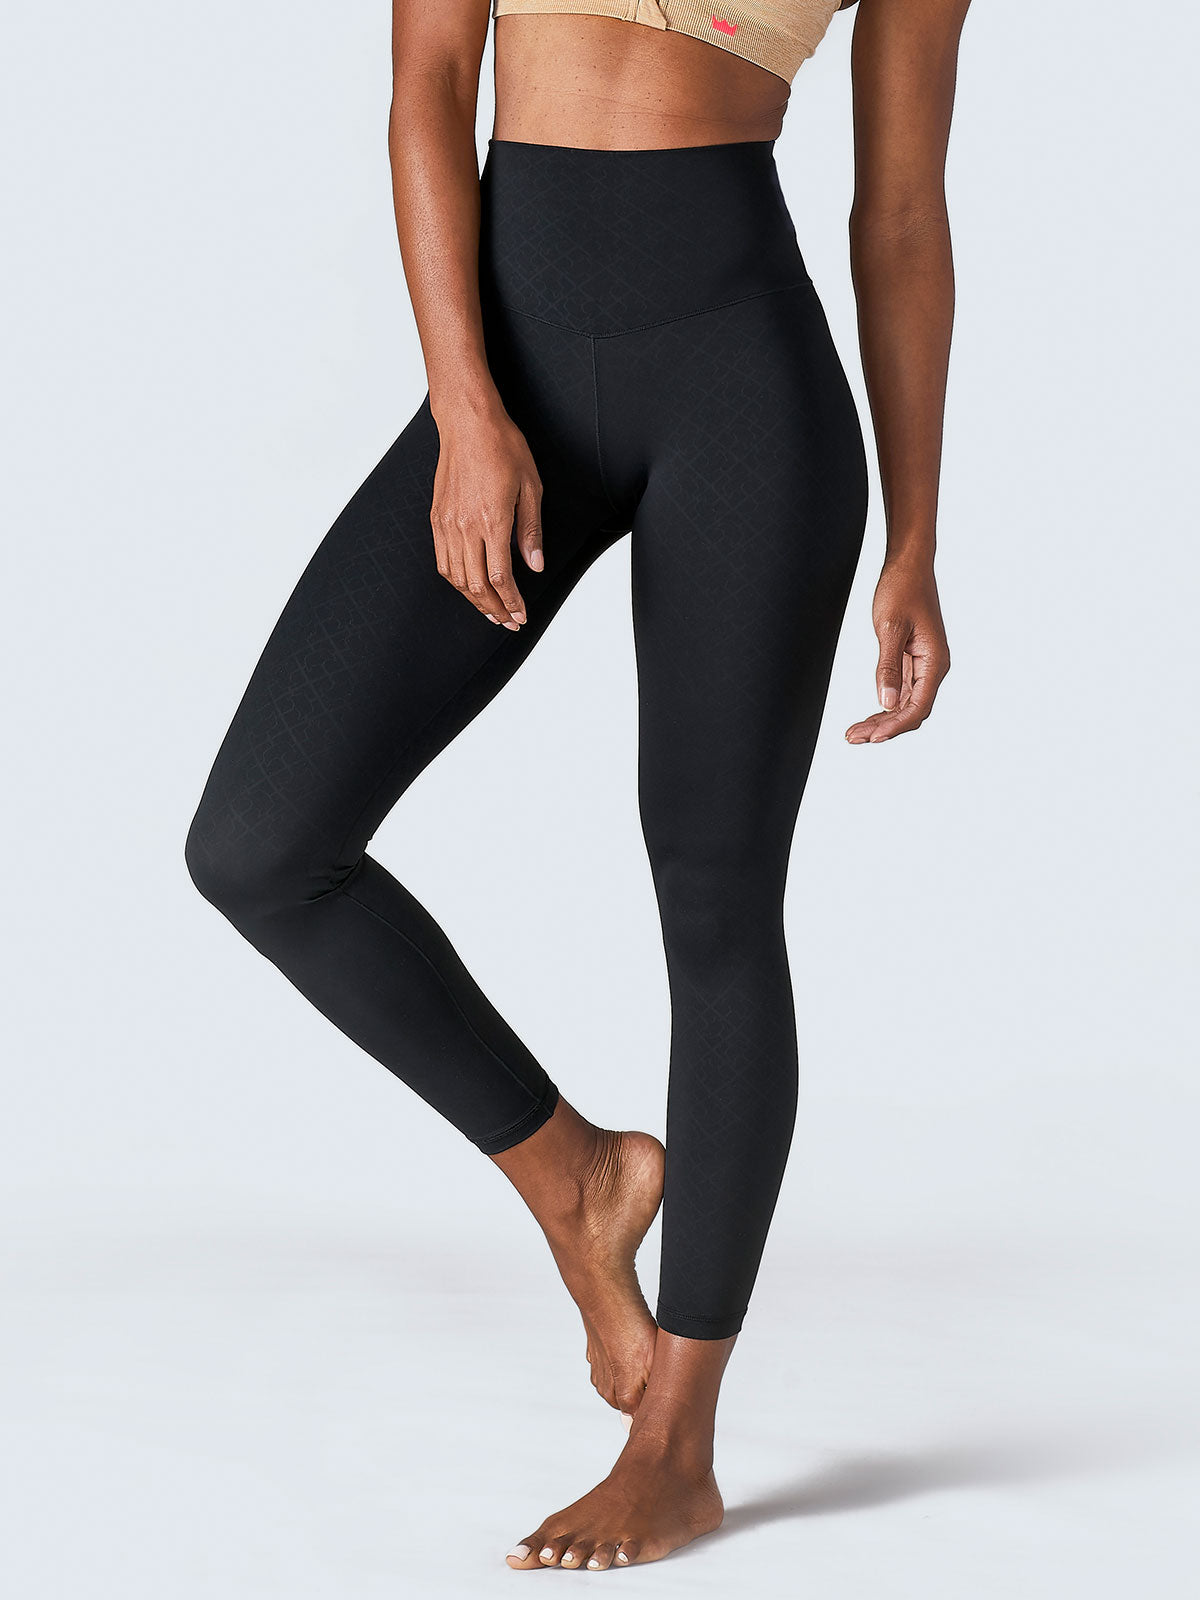 Women's Yoga Pants with Pockets - LETSFIT IS3 Leggings with